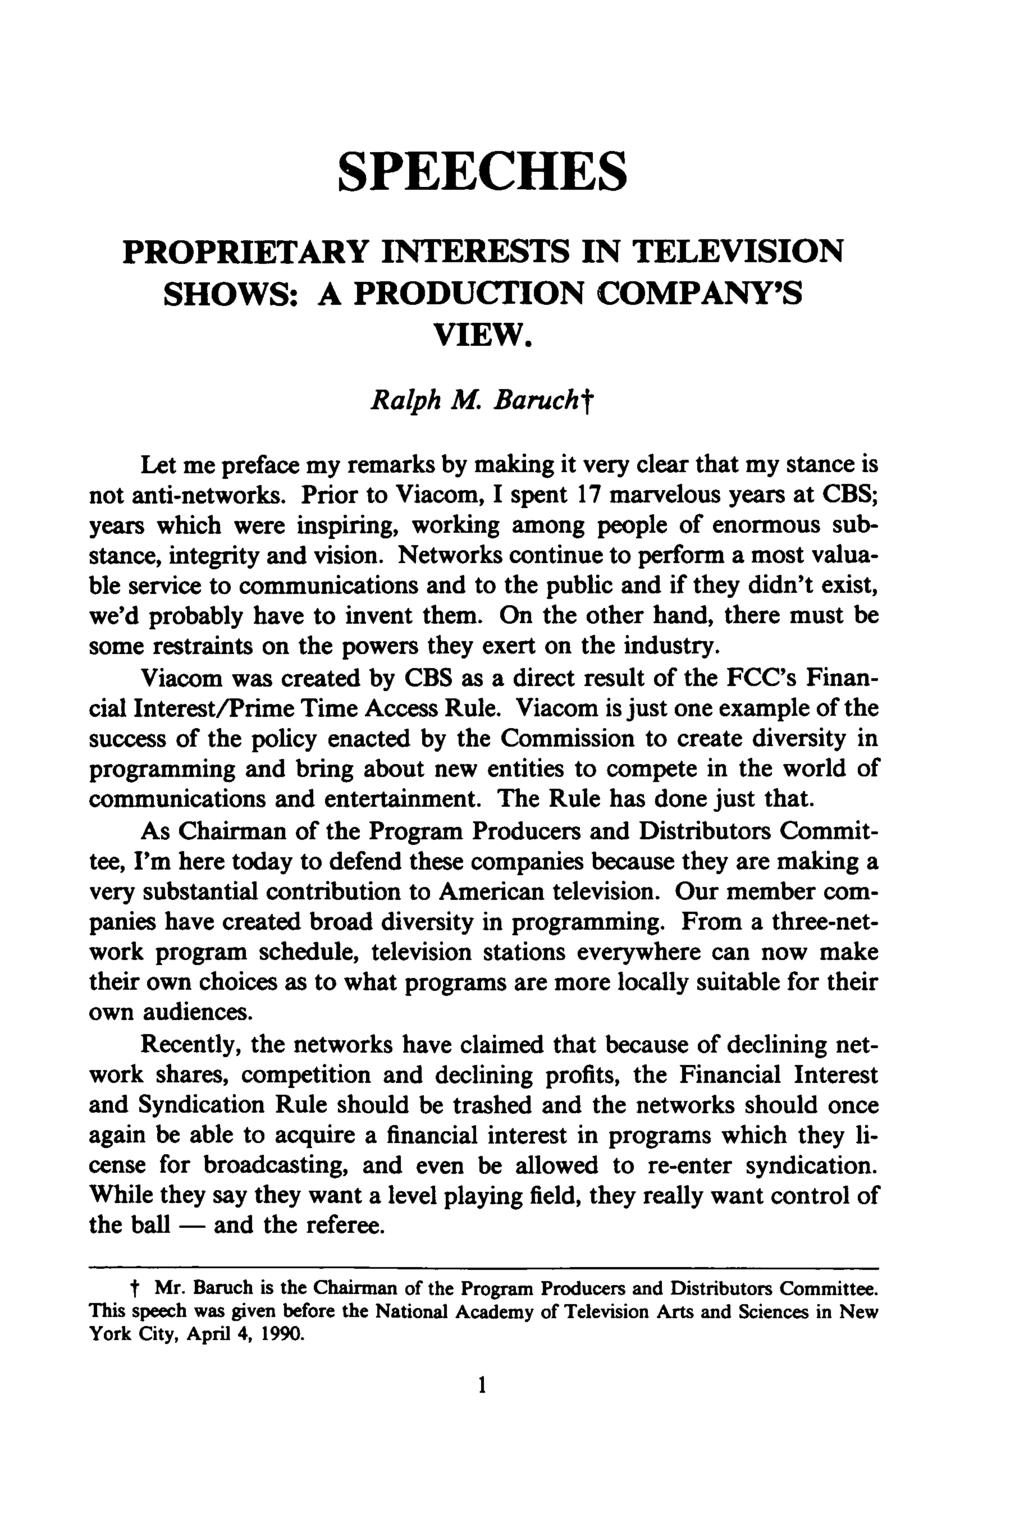 SPEECHES PROPRIETARY INTERESTS IN TELEVISION SHOWS: A PRODUCTION COMPANY'S VIEW. Ralph M. Barucht Let me preface my remarks by making it very clear that my stance is not anti-networks.